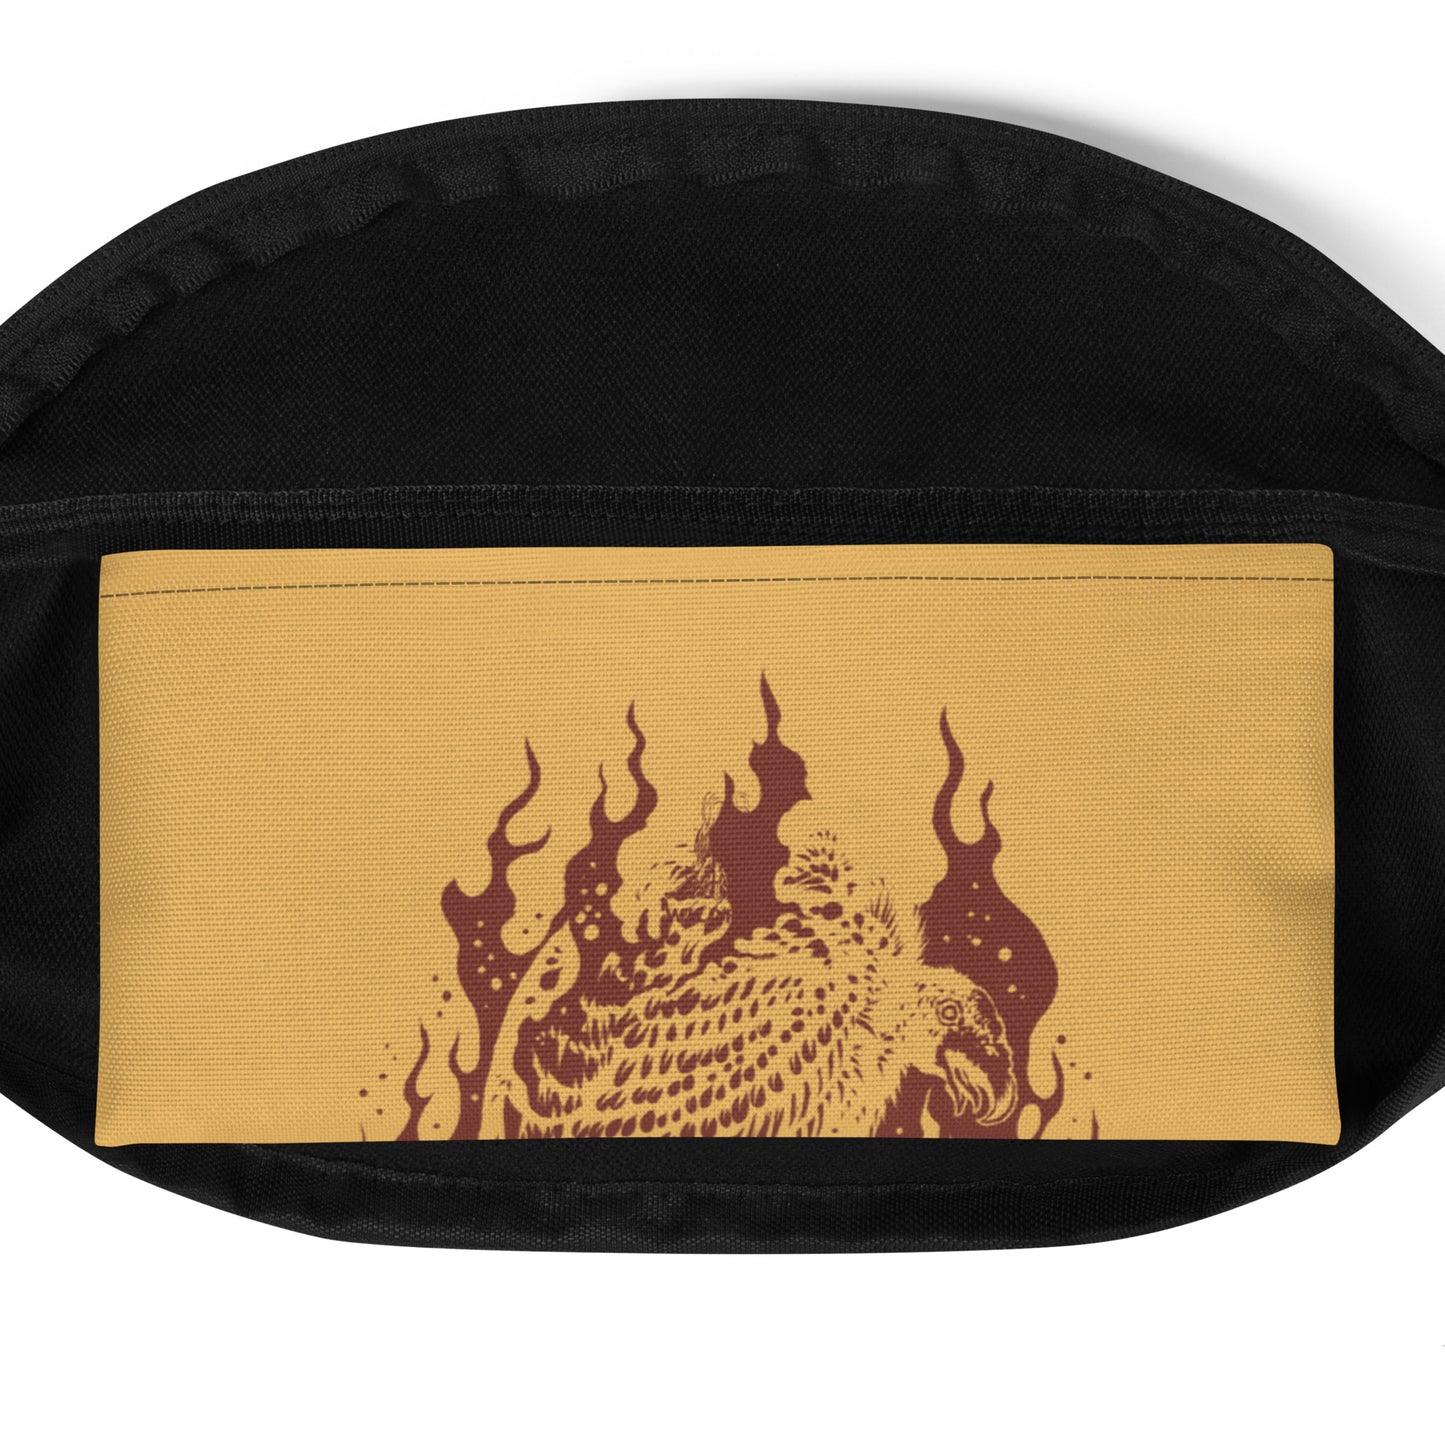 Wildfire Cigars Vulture fanny pack from the back